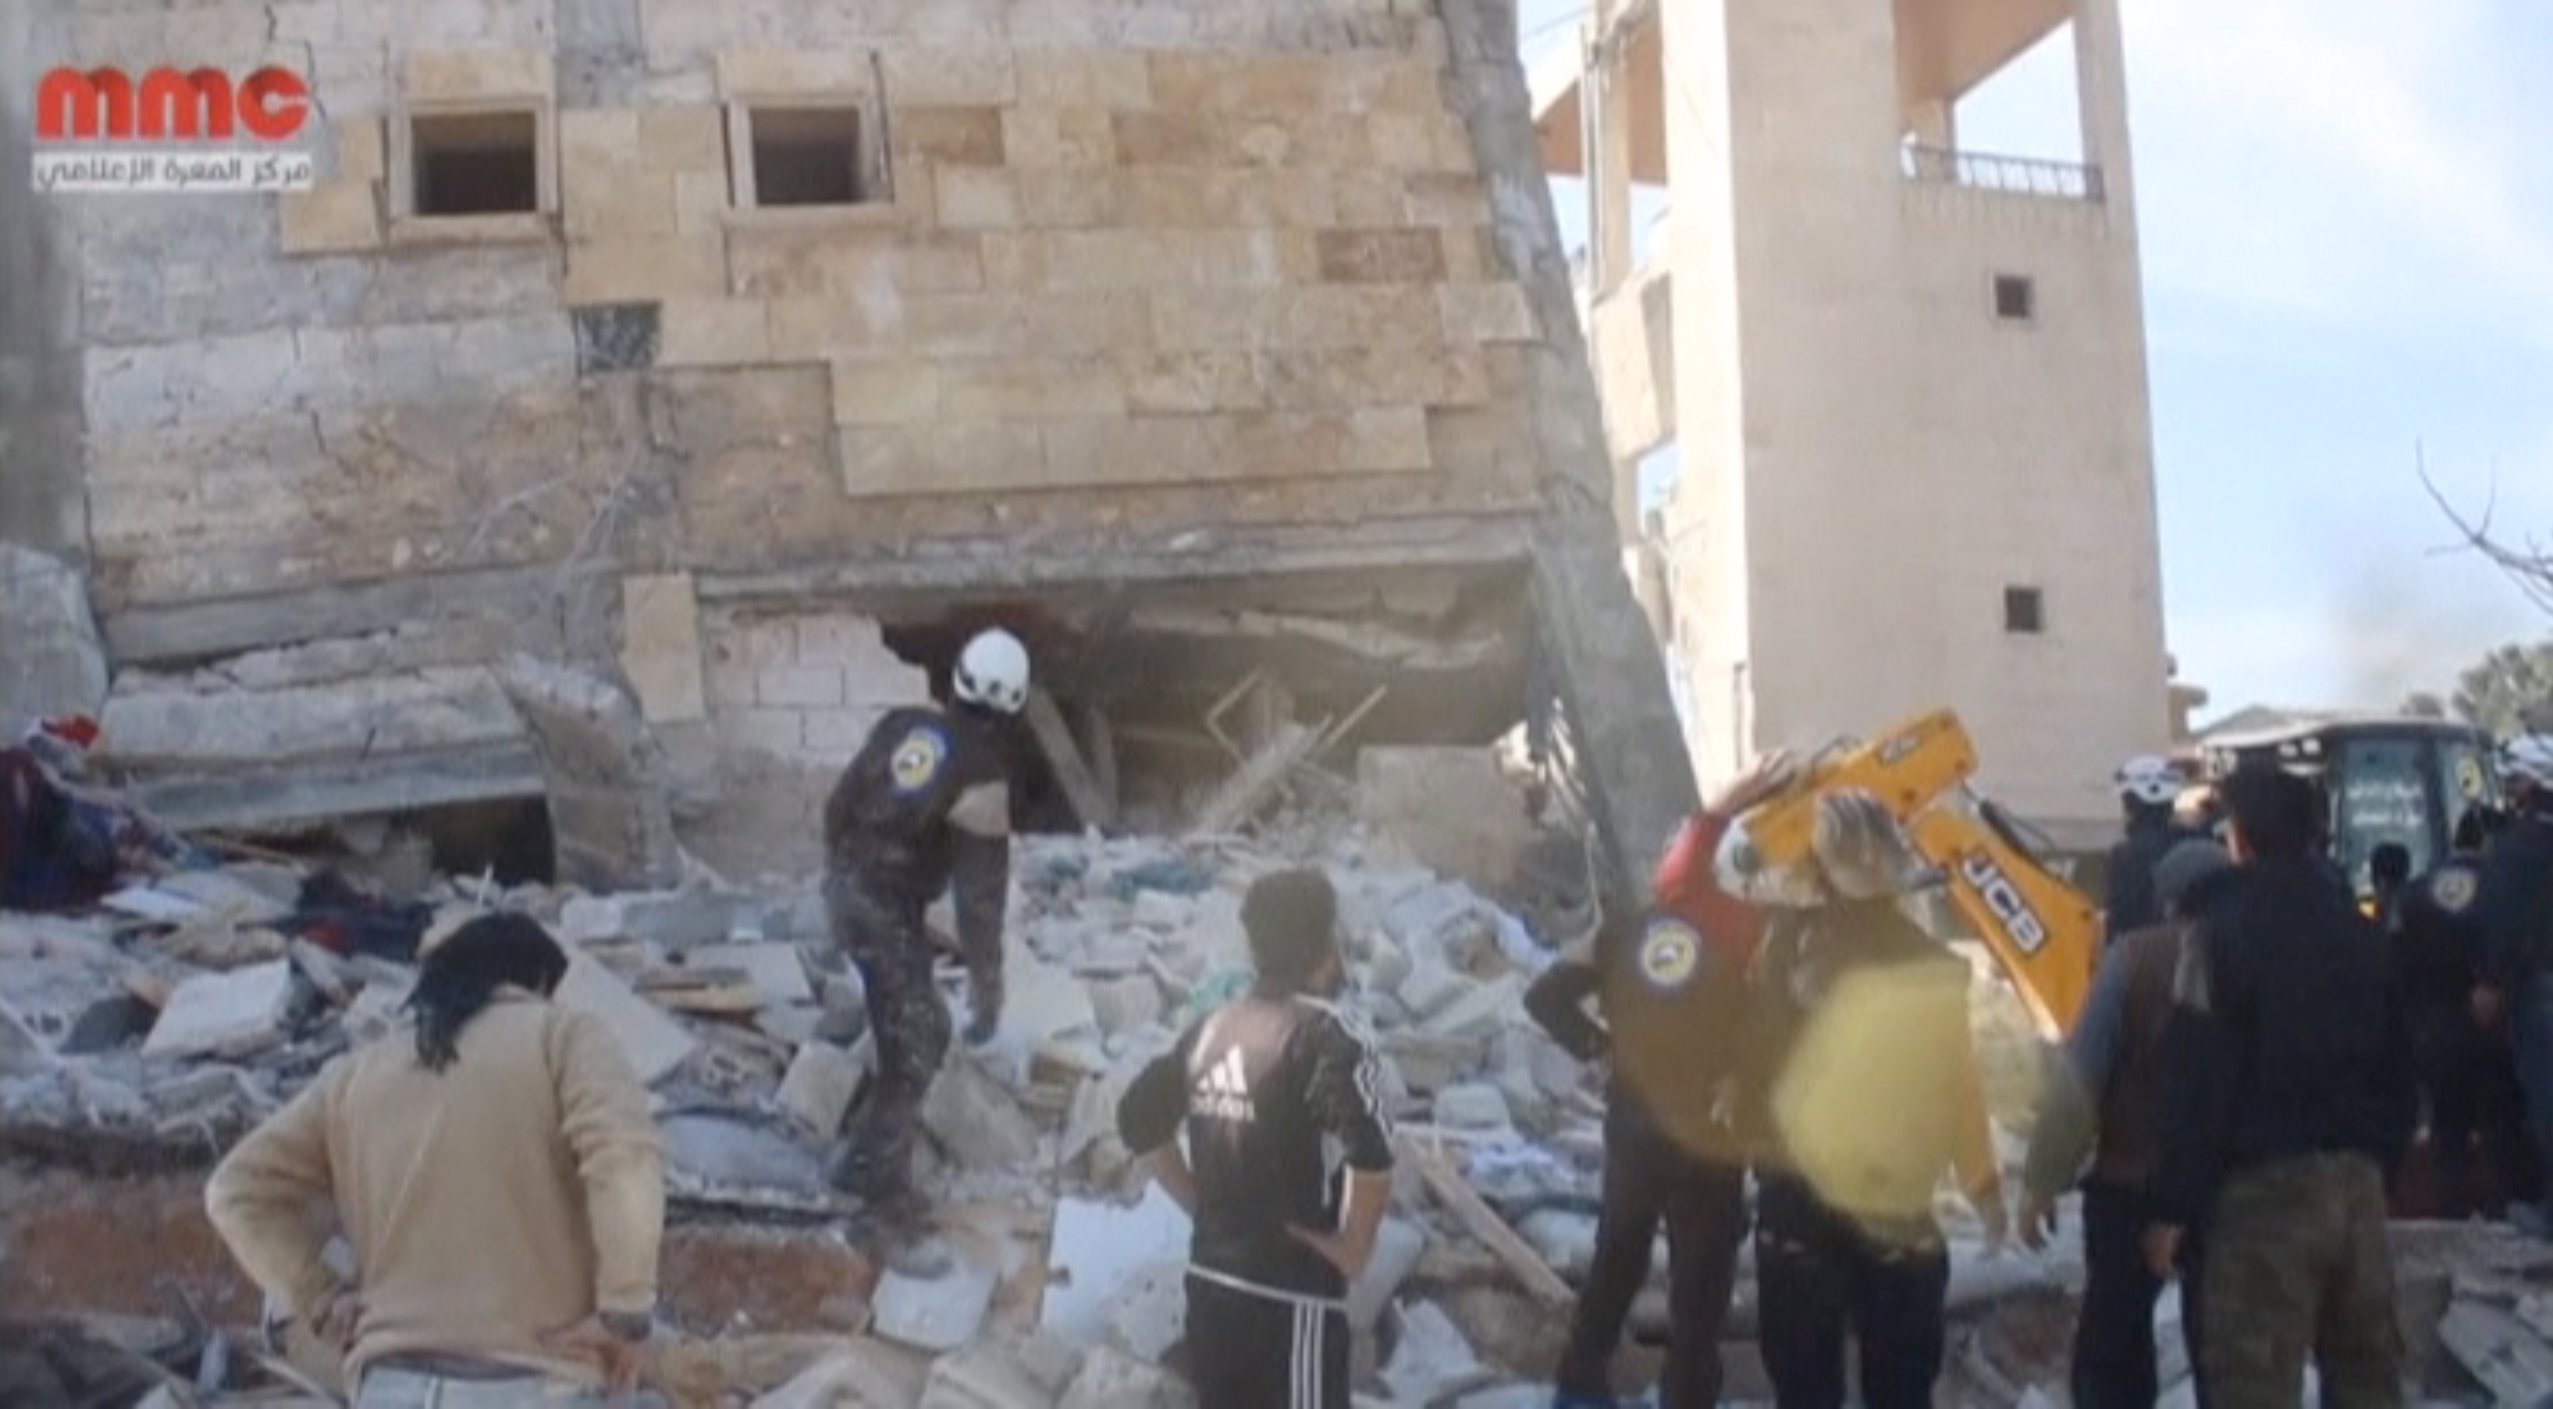 Still image taken from video shows people gathering near a destroyed building said to be a Medecins Sans Frontieres (MSF) supported hospital in Marat al Numan, Idlib, Syria